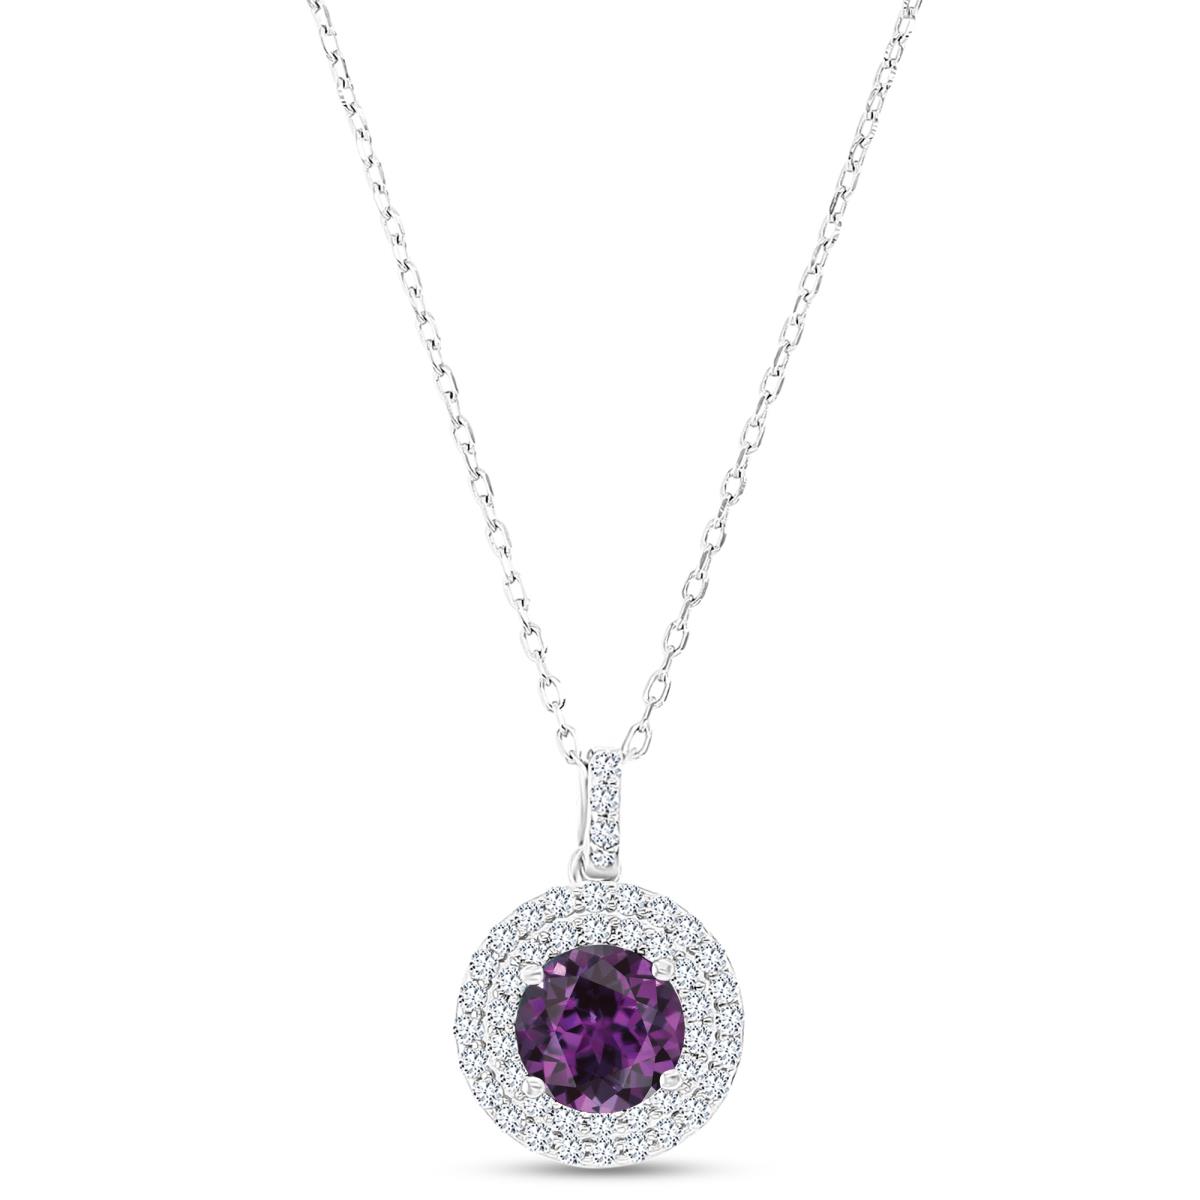 Sterling Silver Rhodium 7mm RD Cr Alexandrite / Cr White Sapphire Duble Halo 16"+2" Necklace